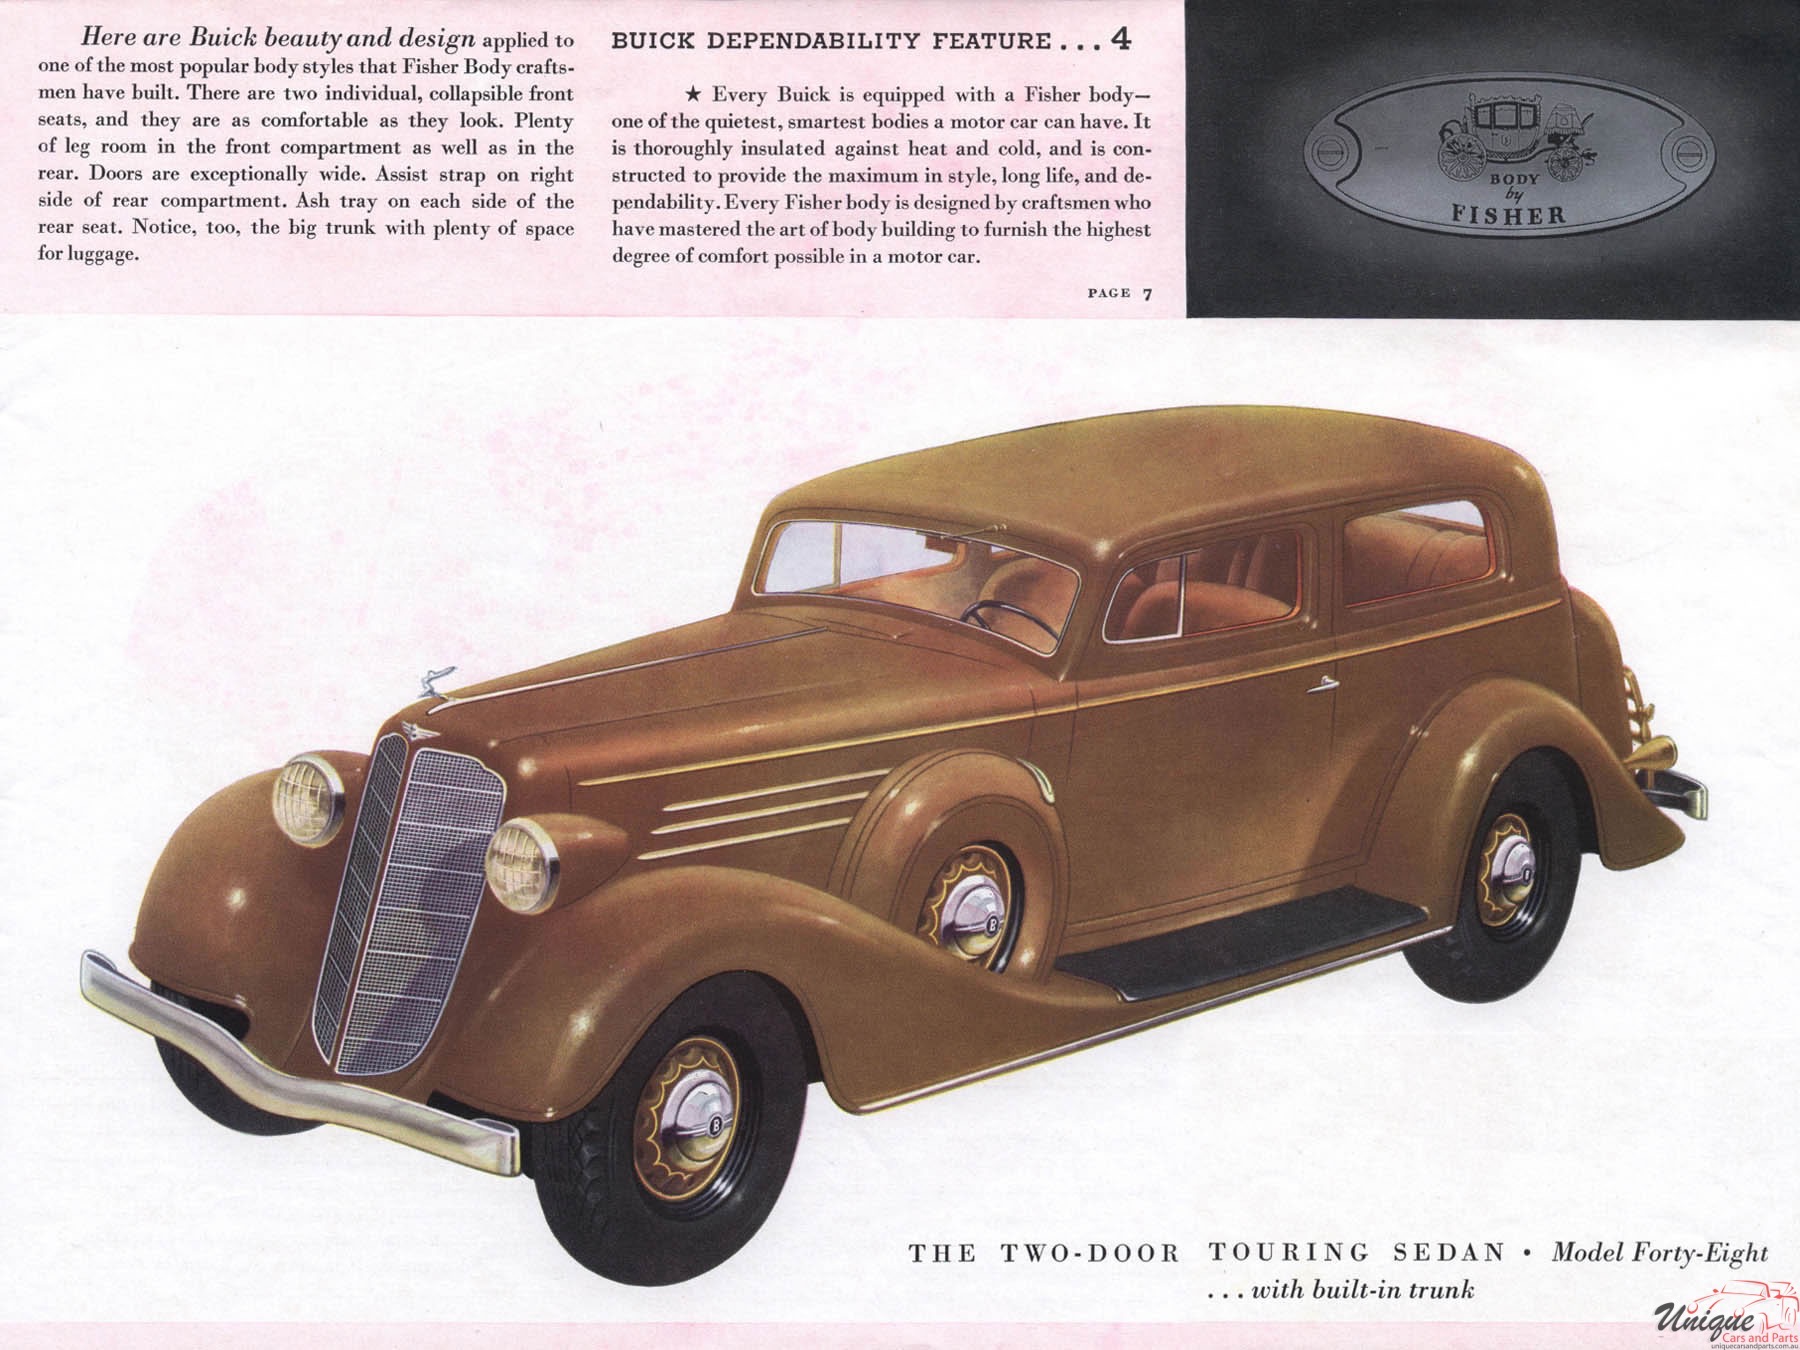 1935 Buick Brochure Page 12